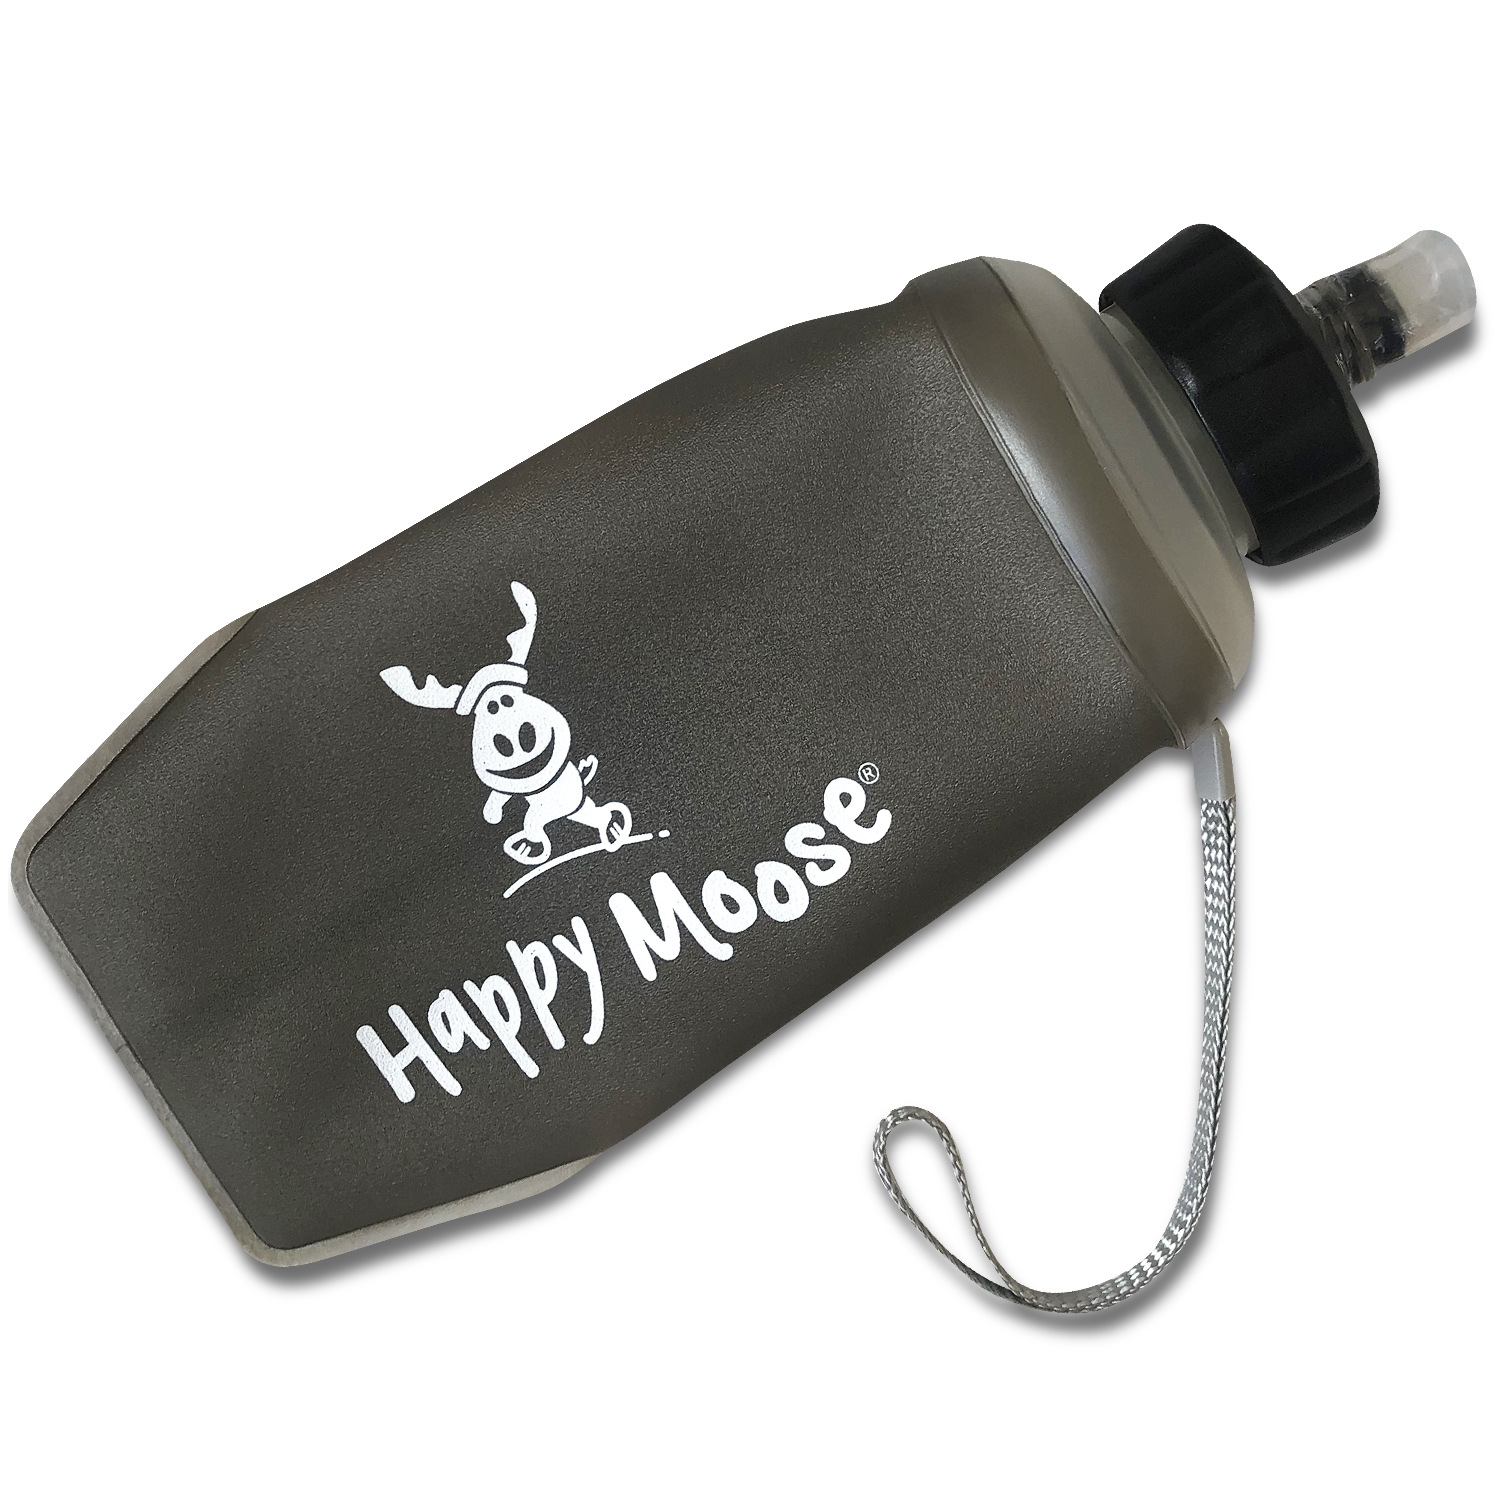 Soft Flasks. My quick guide to flask happiness. It's a thing